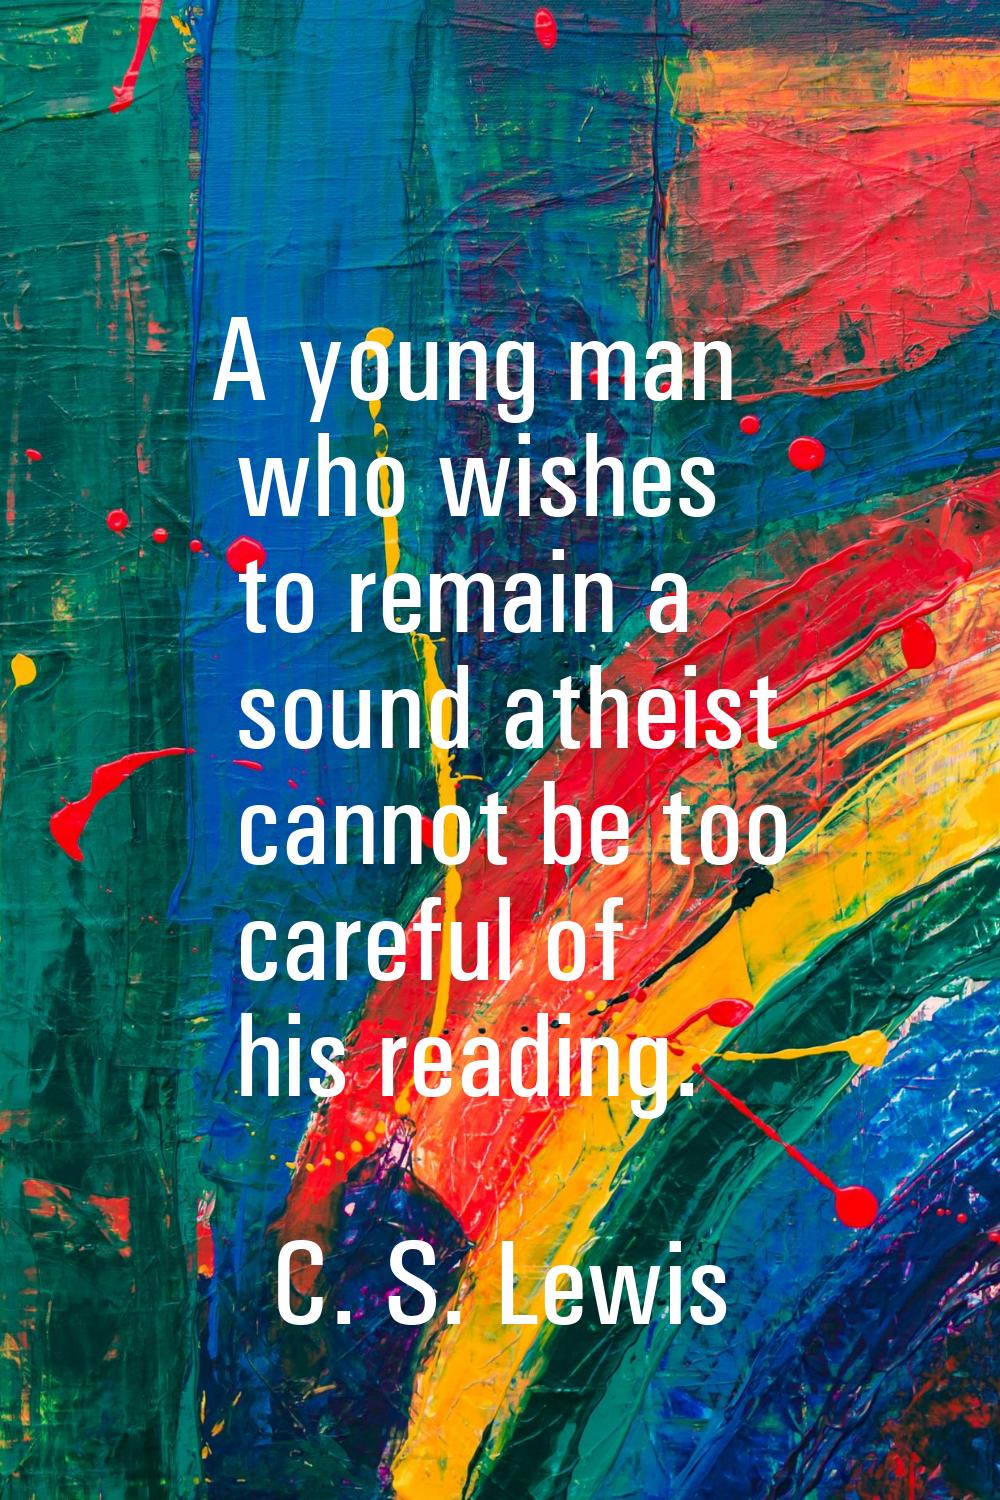 A young man who wishes to remain a sound atheist cannot be too careful of his reading.